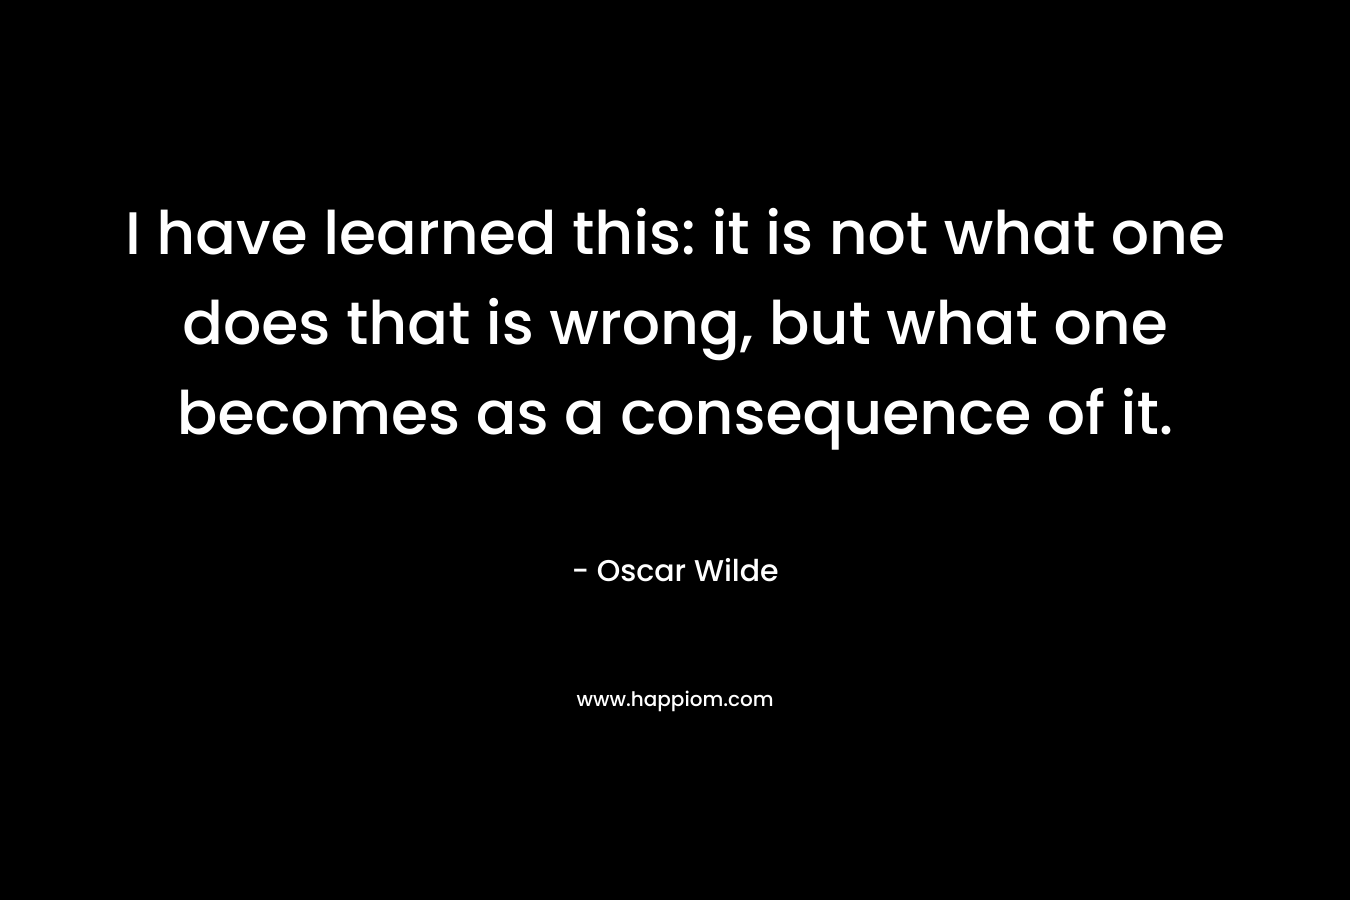 I have learned this: it is not what one does that is wrong, but what one becomes as a consequence of it. – Oscar Wilde